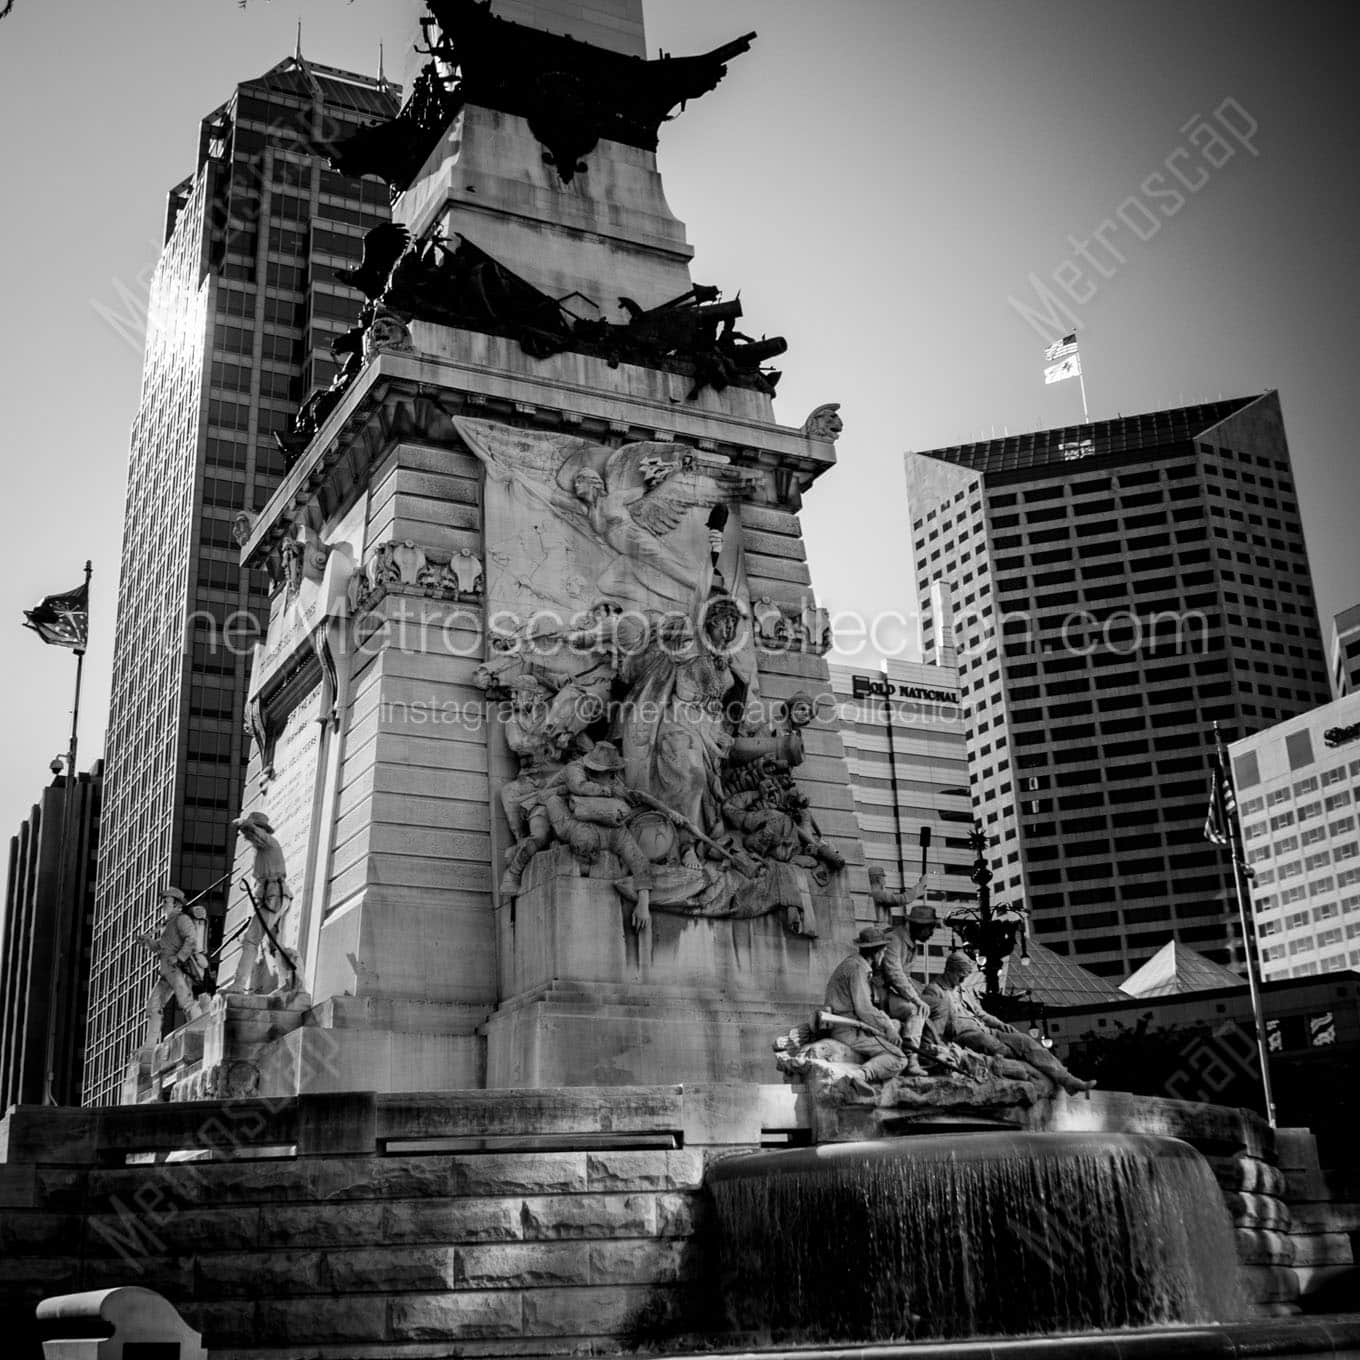 east side soldiers sailors monument Black & White Office Art